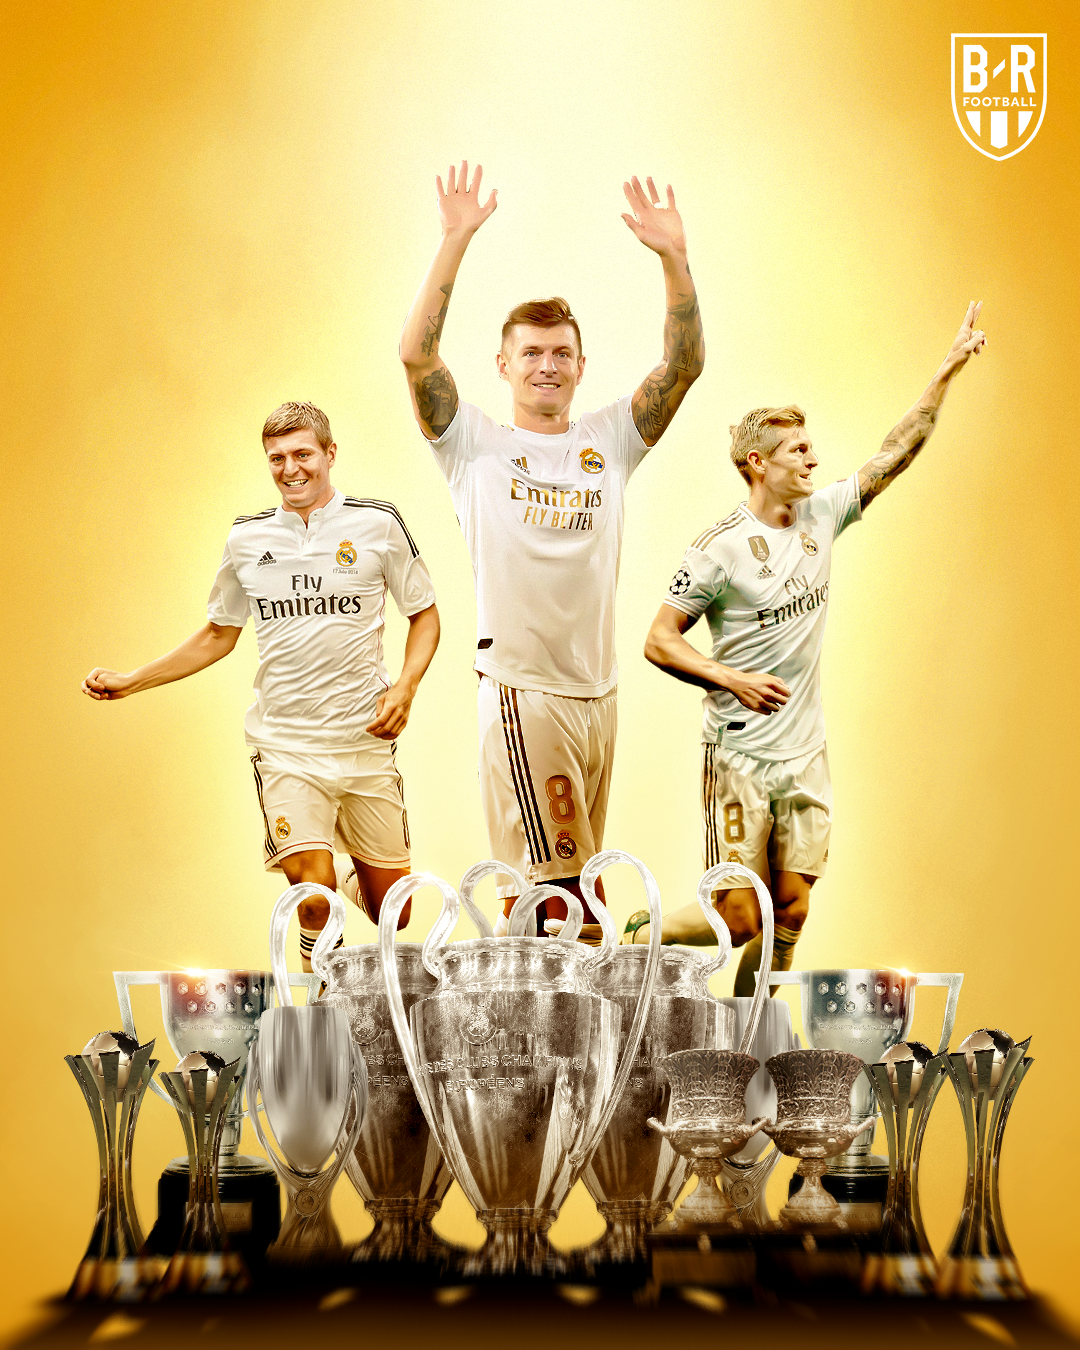 B/R Football on X: "Six years since Toni Kroos joined Real Madrid. Trophies  followed 🏆 https://t.co/vKNwM3L08c" / X